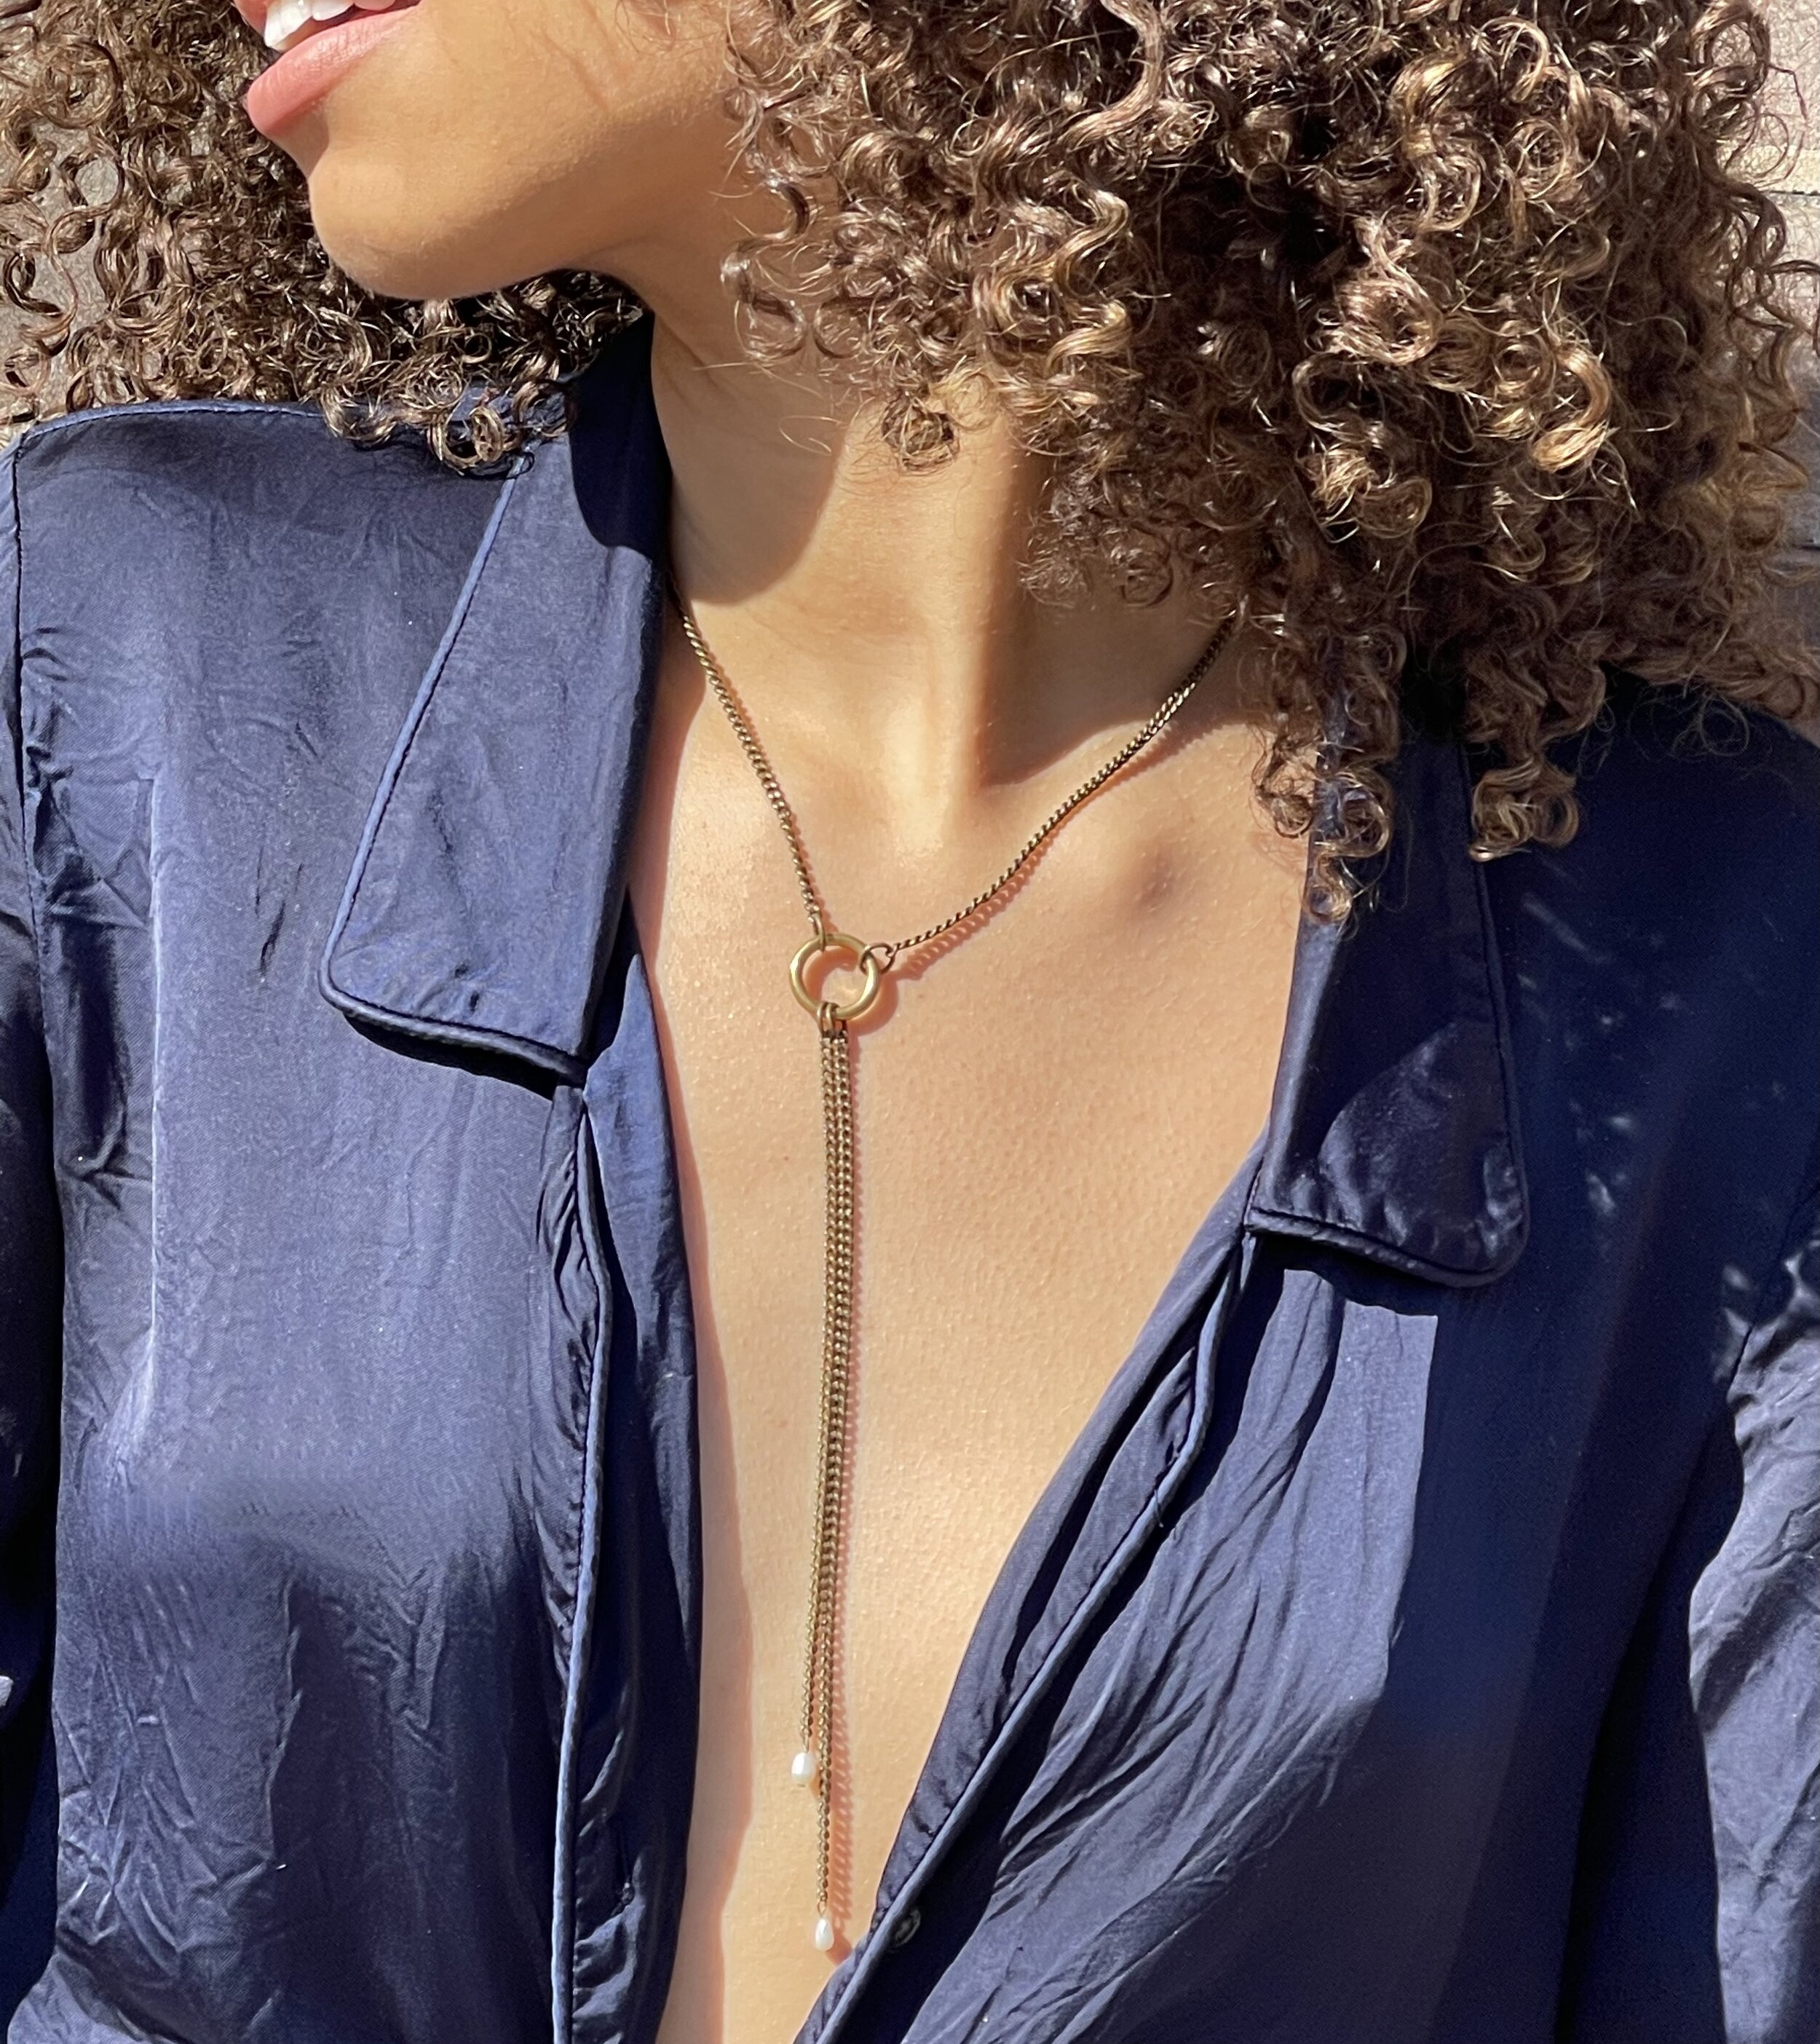 Dolorous Jewelry Spring 2021 Brass and Pearl Lariat Bolo Necklace Earrings and Bracelet.jpeg